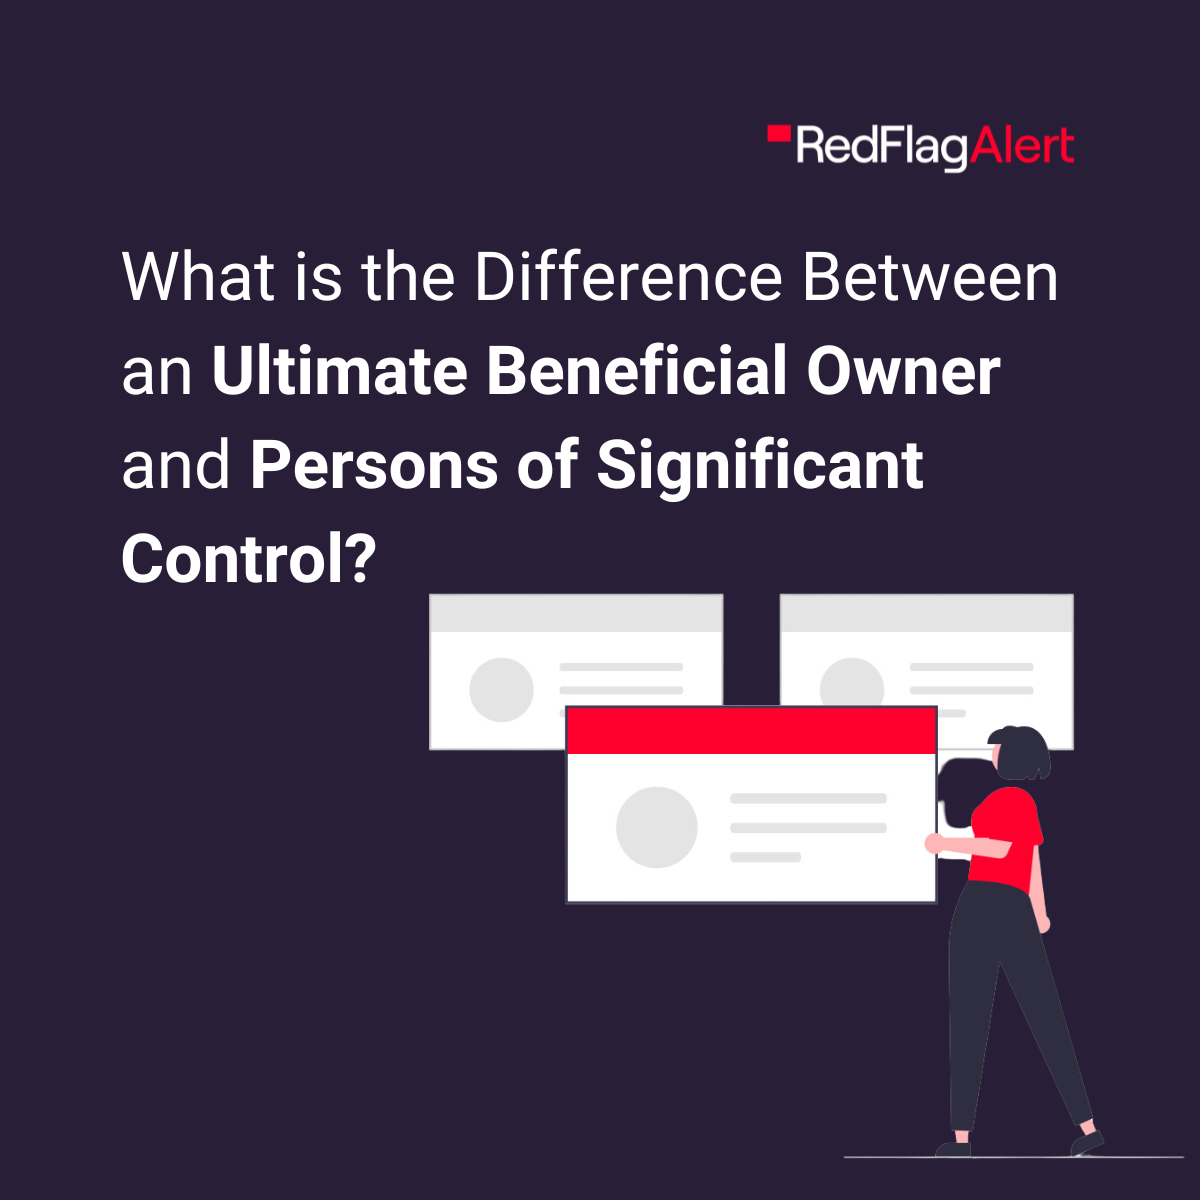 Ultimate Beneficial Owner (UBO) vs Persons of Significant Control (PSC)